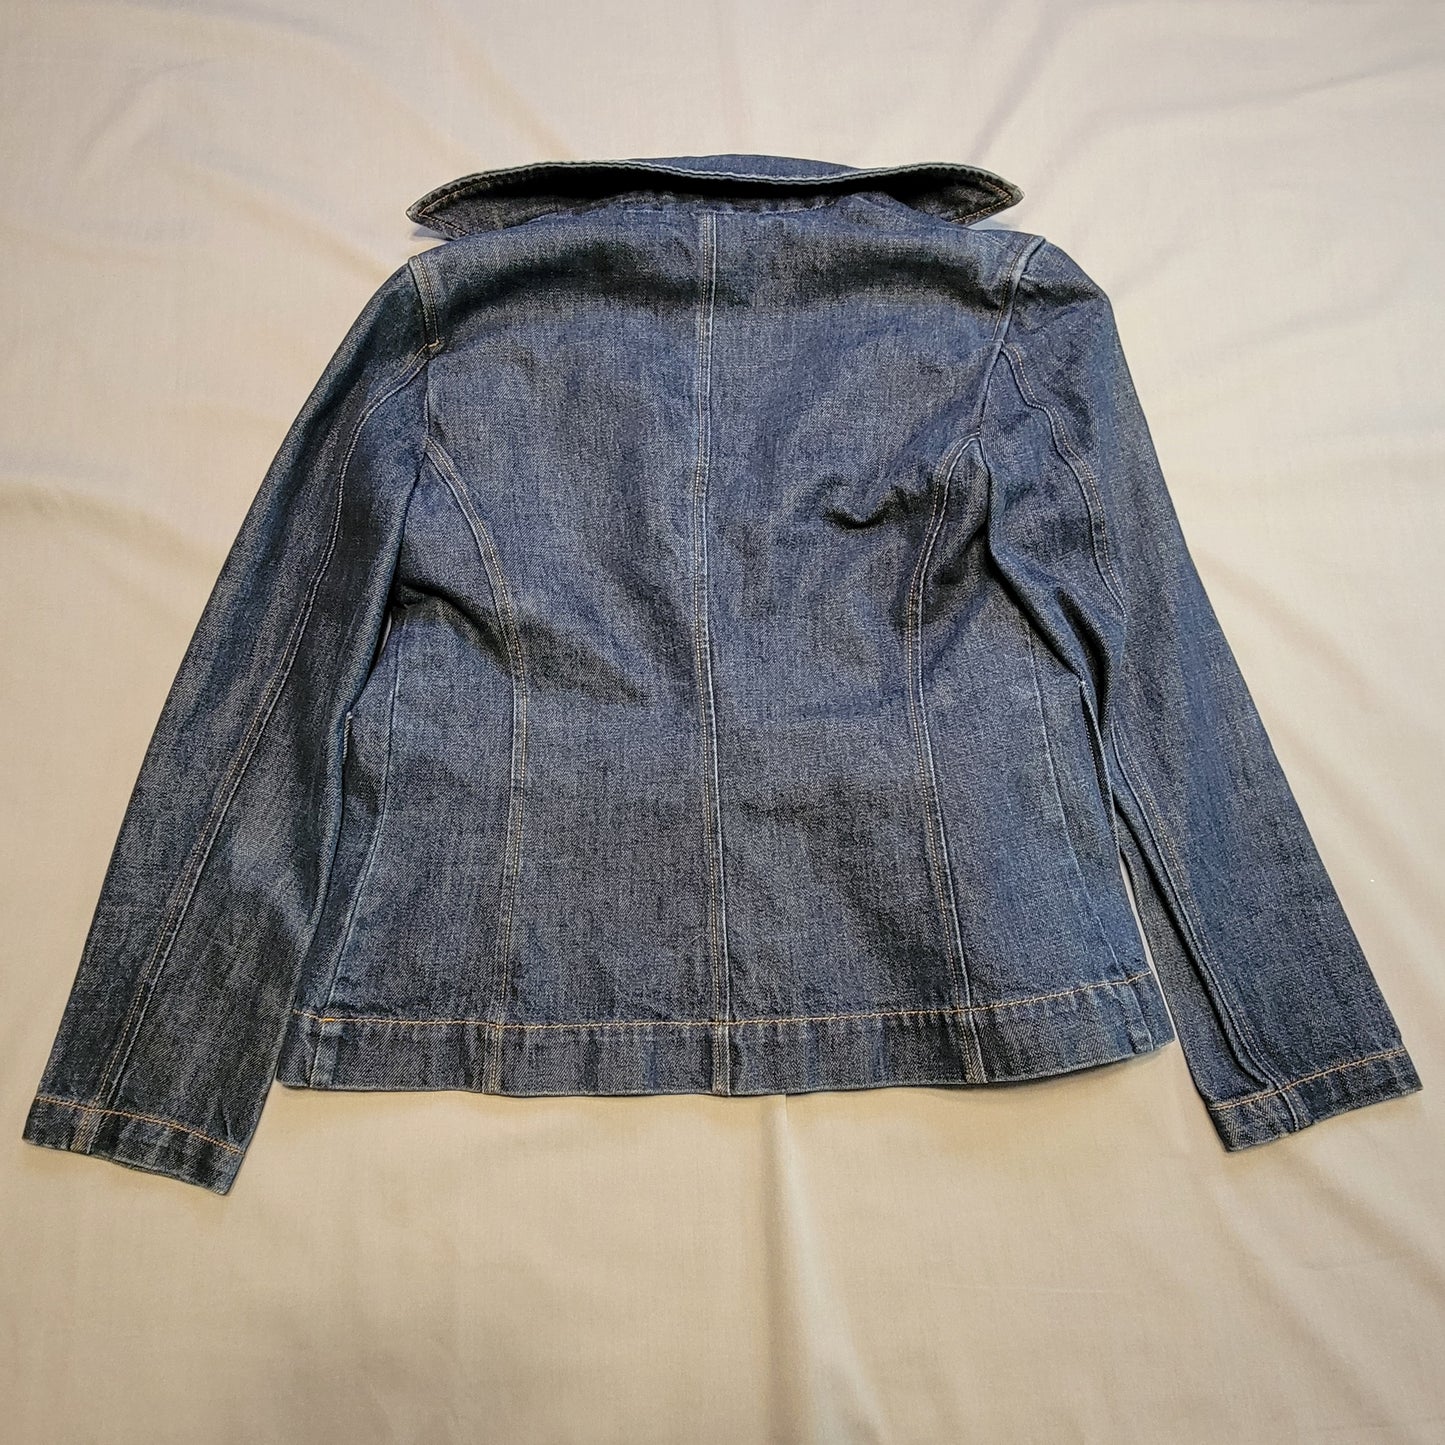 Pre-Owned Women's Extra Small (XS) The Limited Double Breasted Denim Jacket